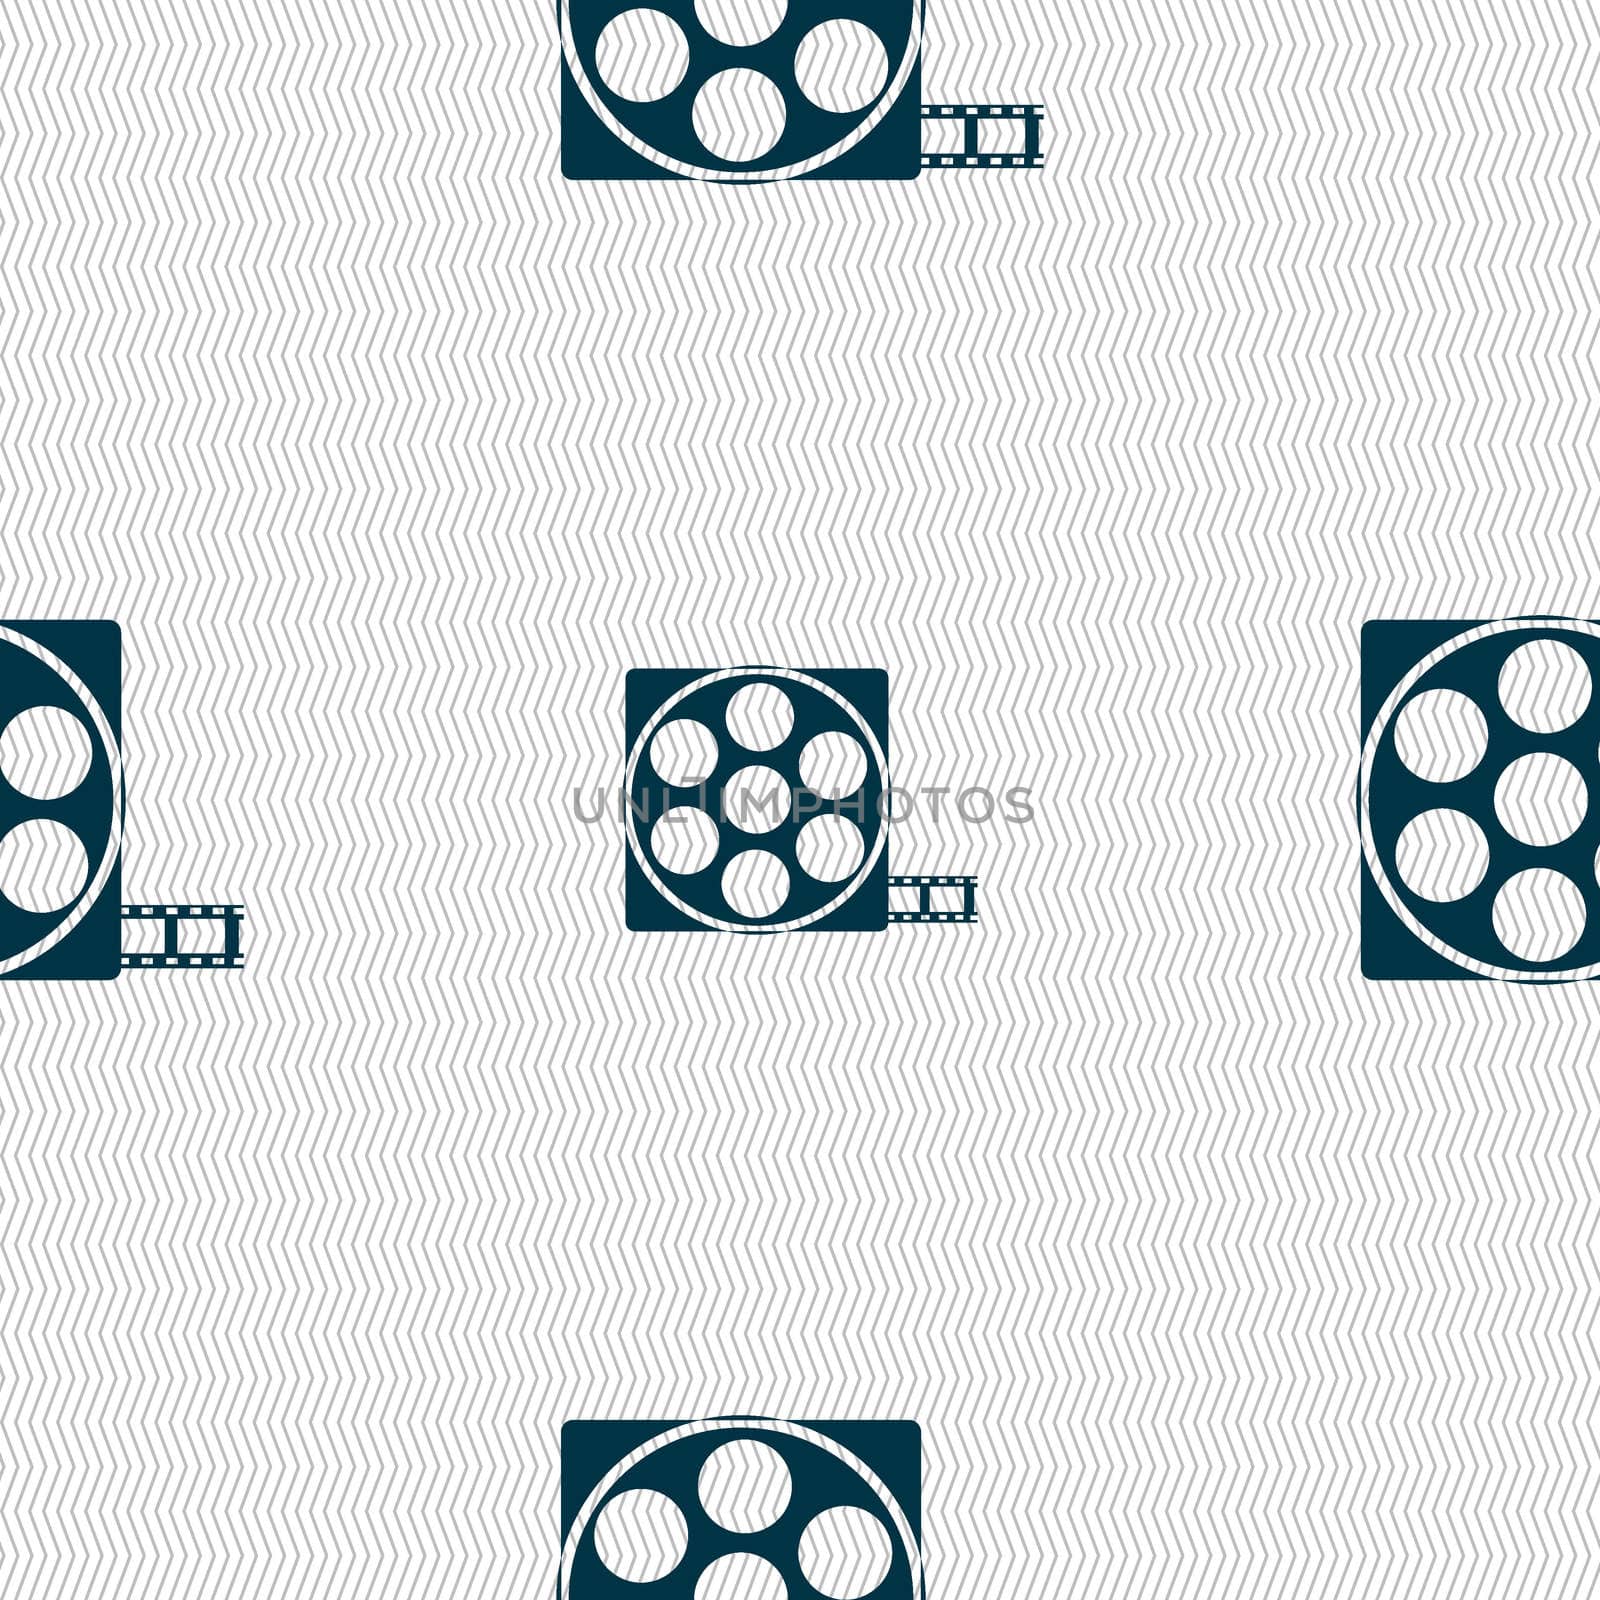 Video sign icon. frame symbol. Seamless abstract background with geometric shapes. illustration